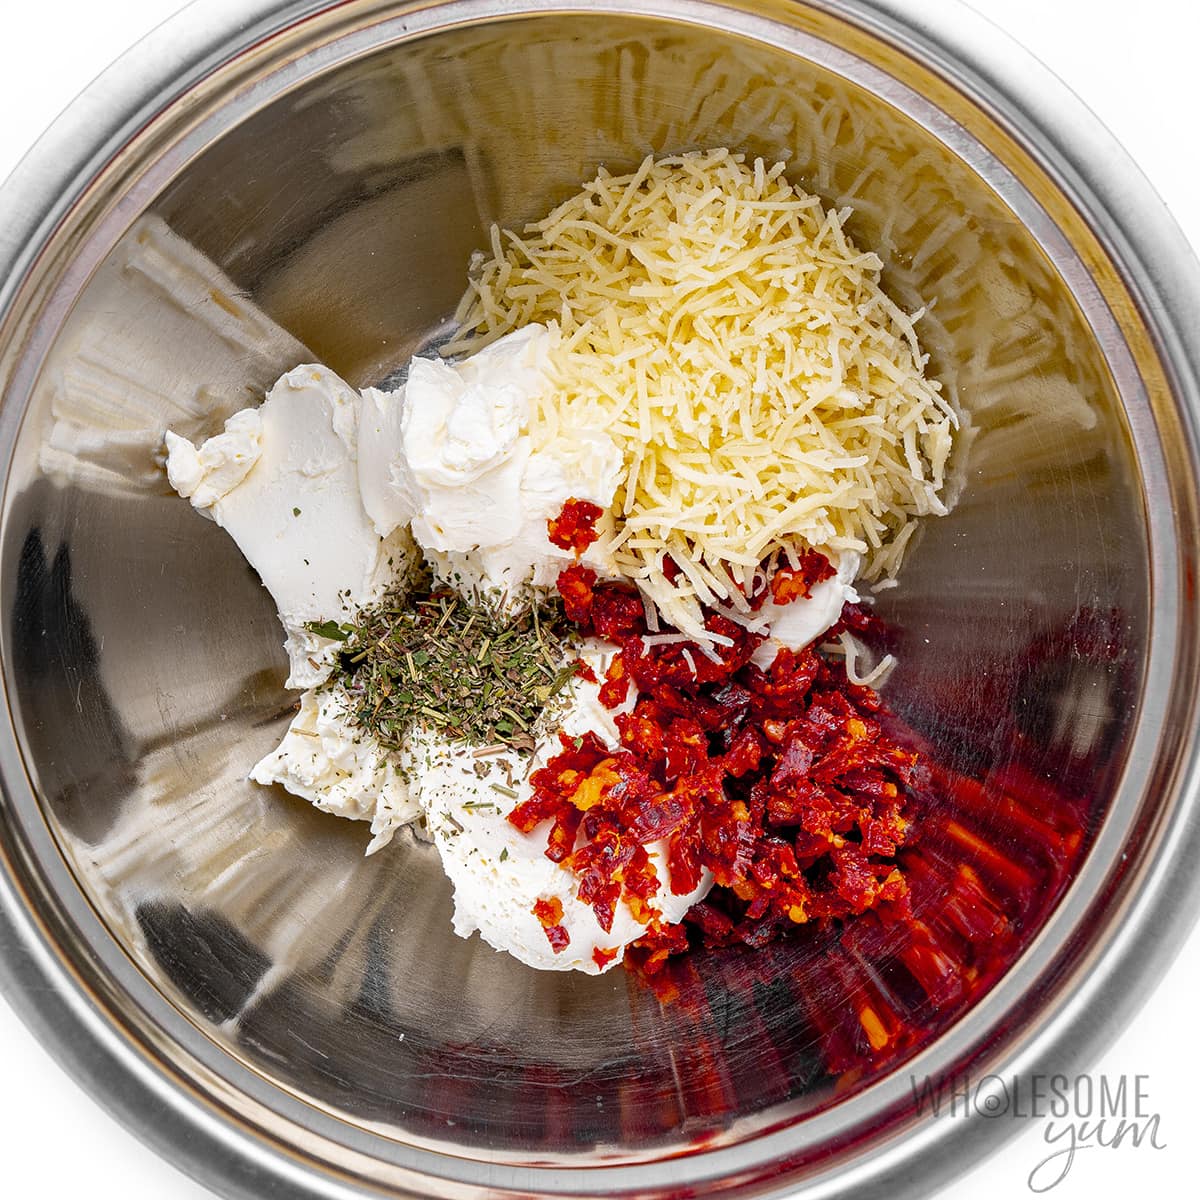 Cream cheese mixture ingredients in a bowl.